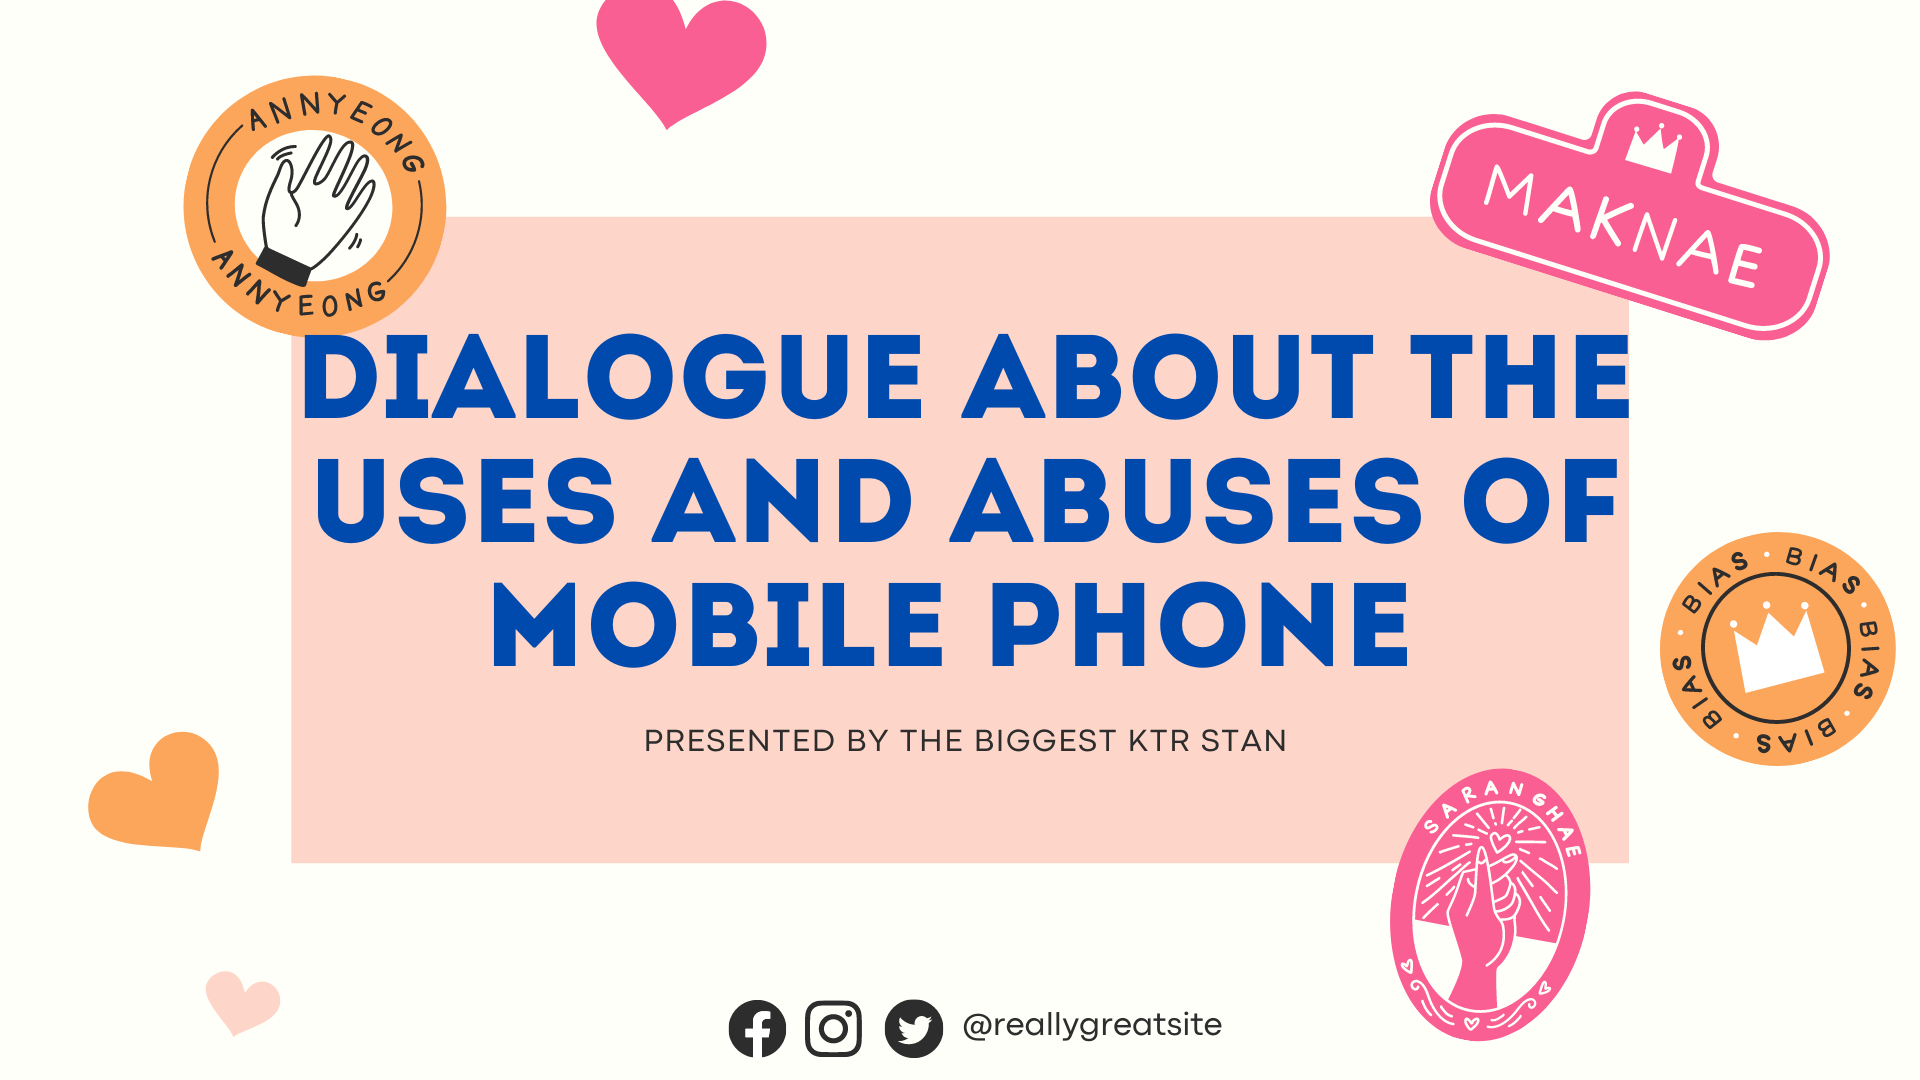 Dialogue about the uses and abuses of mobile phone